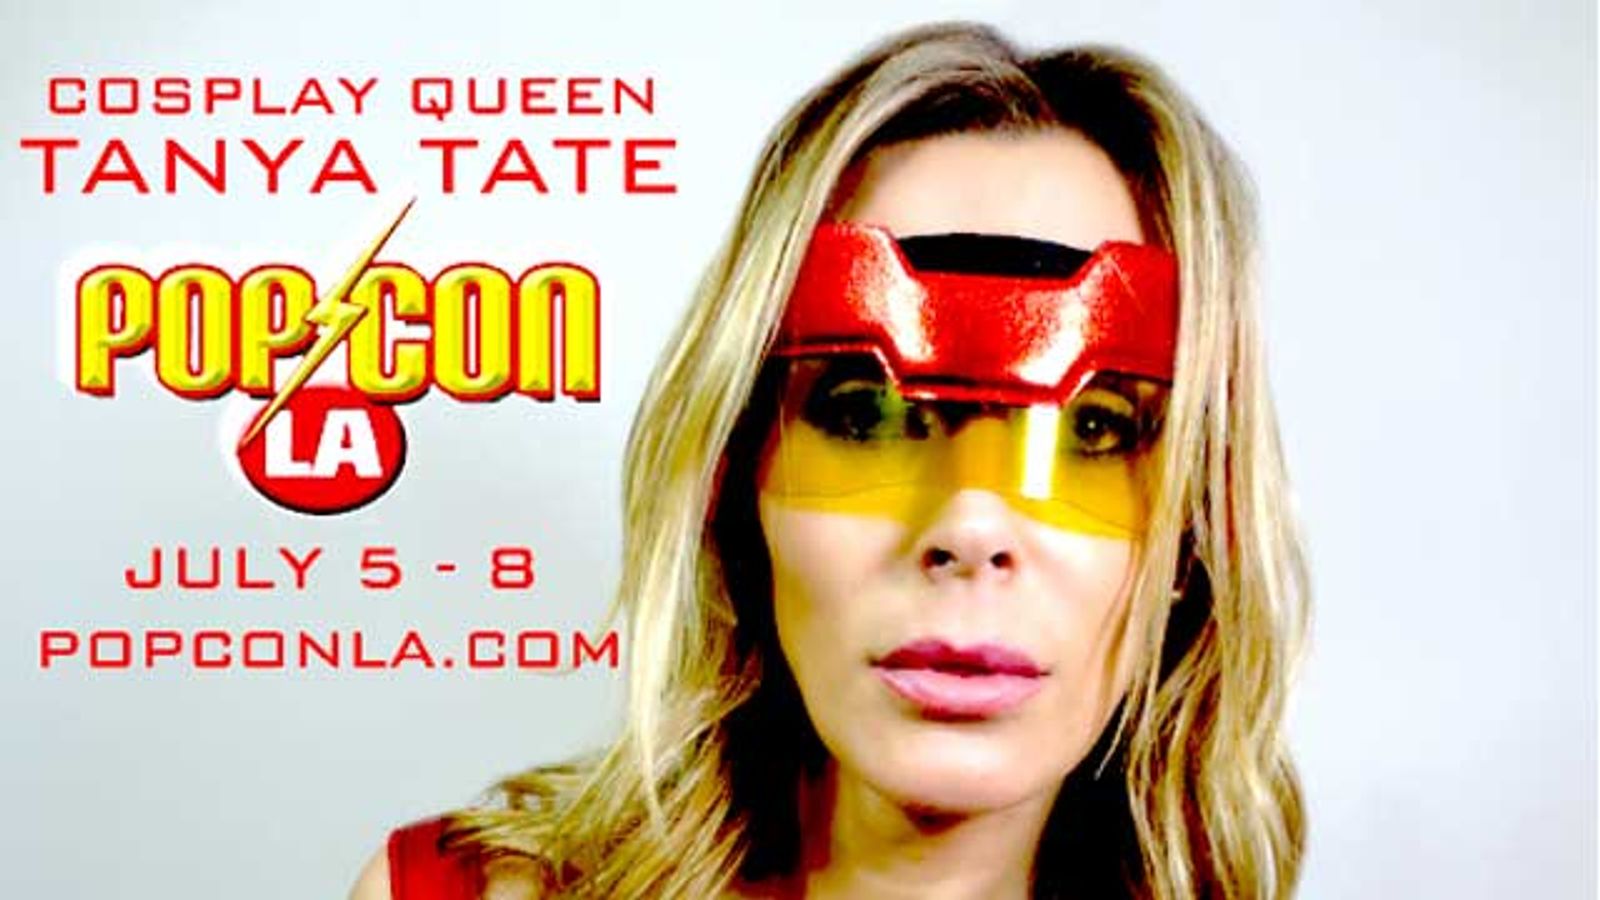 Tanya Tate To Make Signing Appearance At Pop Con LA Event